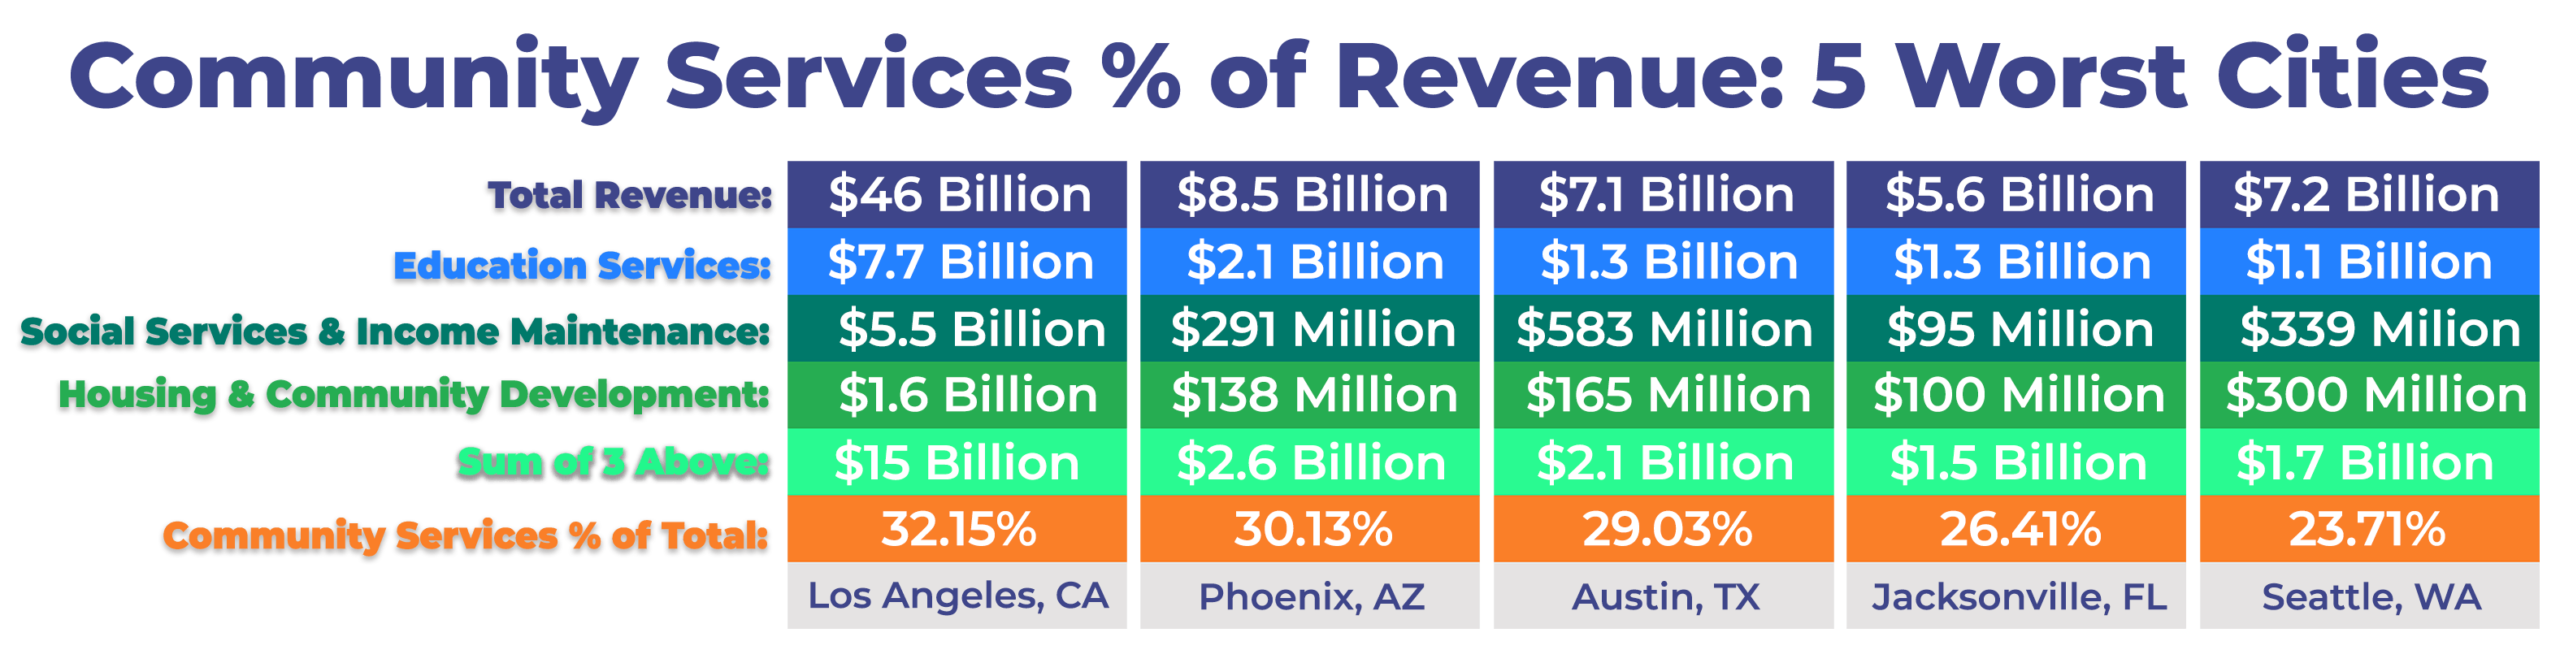 Community Services Spending % of Total Revenue 5 Worst Cities